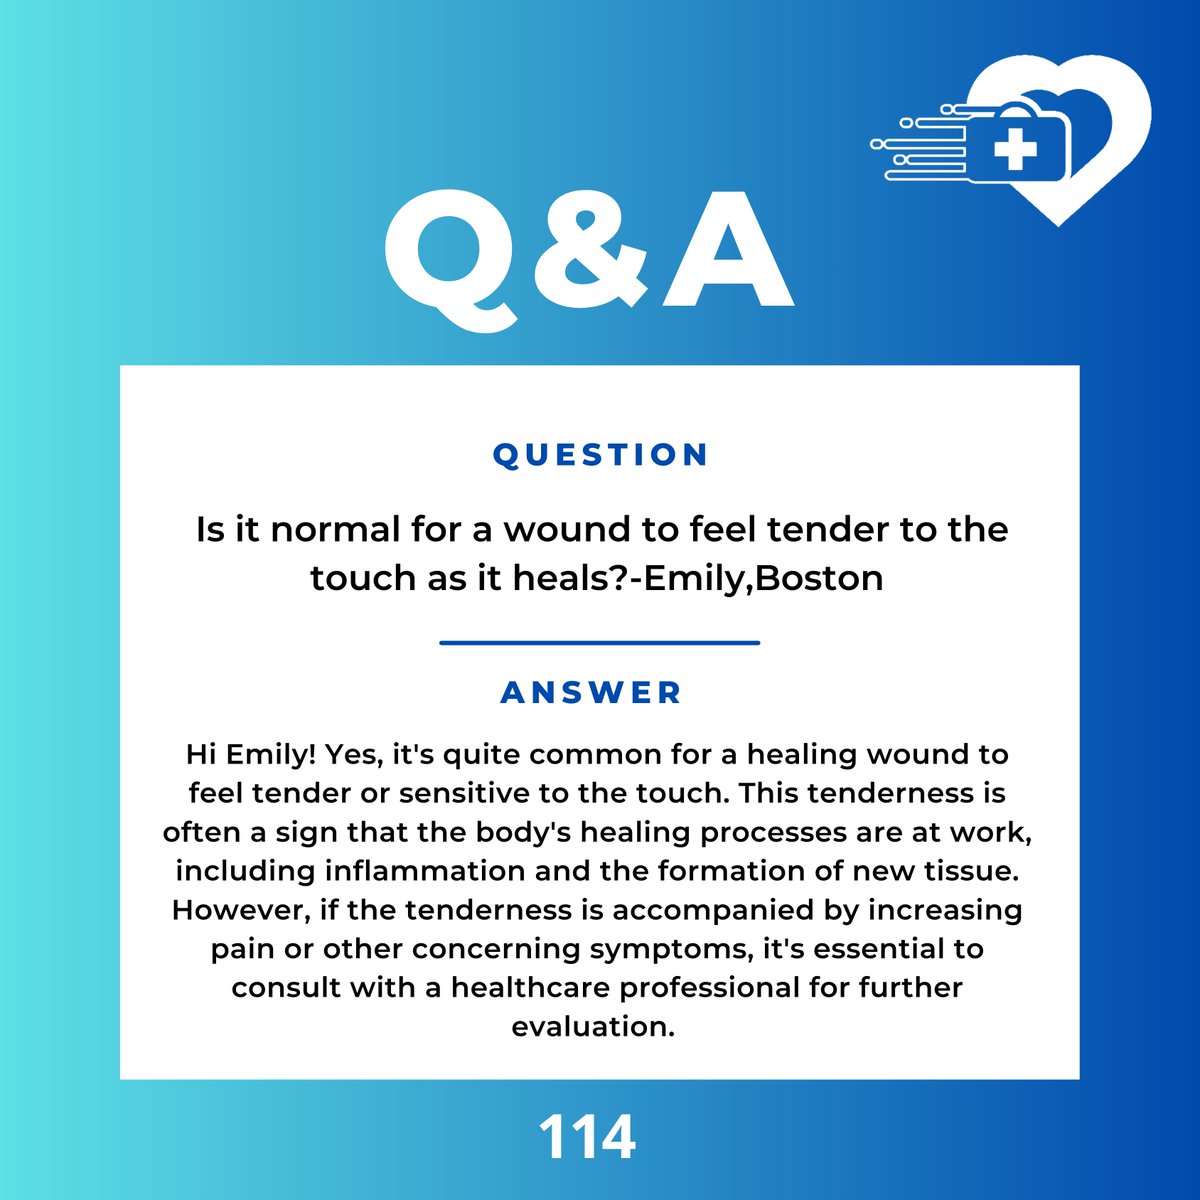 Emily from Boston asks: Is it normal for a healing wound to feel tender?

Yes, Emily! It's common for a healing wound to be tender to the touch, indicating the body's natural healing process. 

#WoundCare #AskBHWoundCare #HealthTips